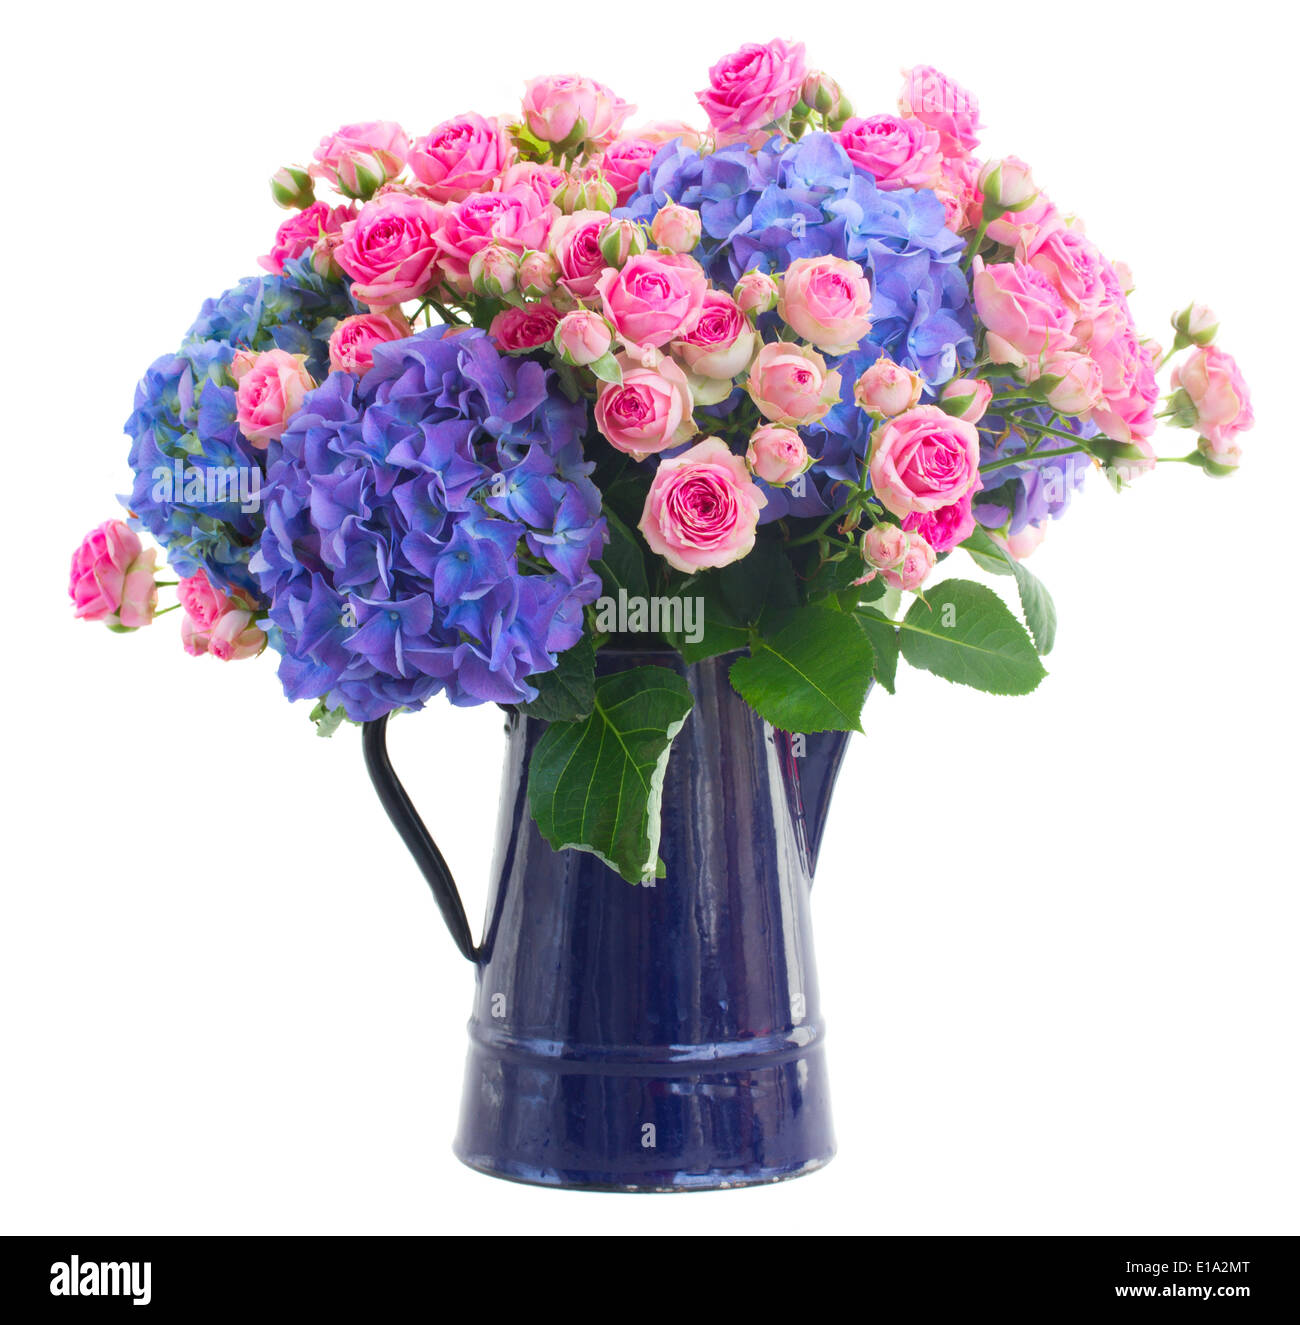 bouquet fresh pink roses and blue hortensia flowers Stock Photo - Alamy